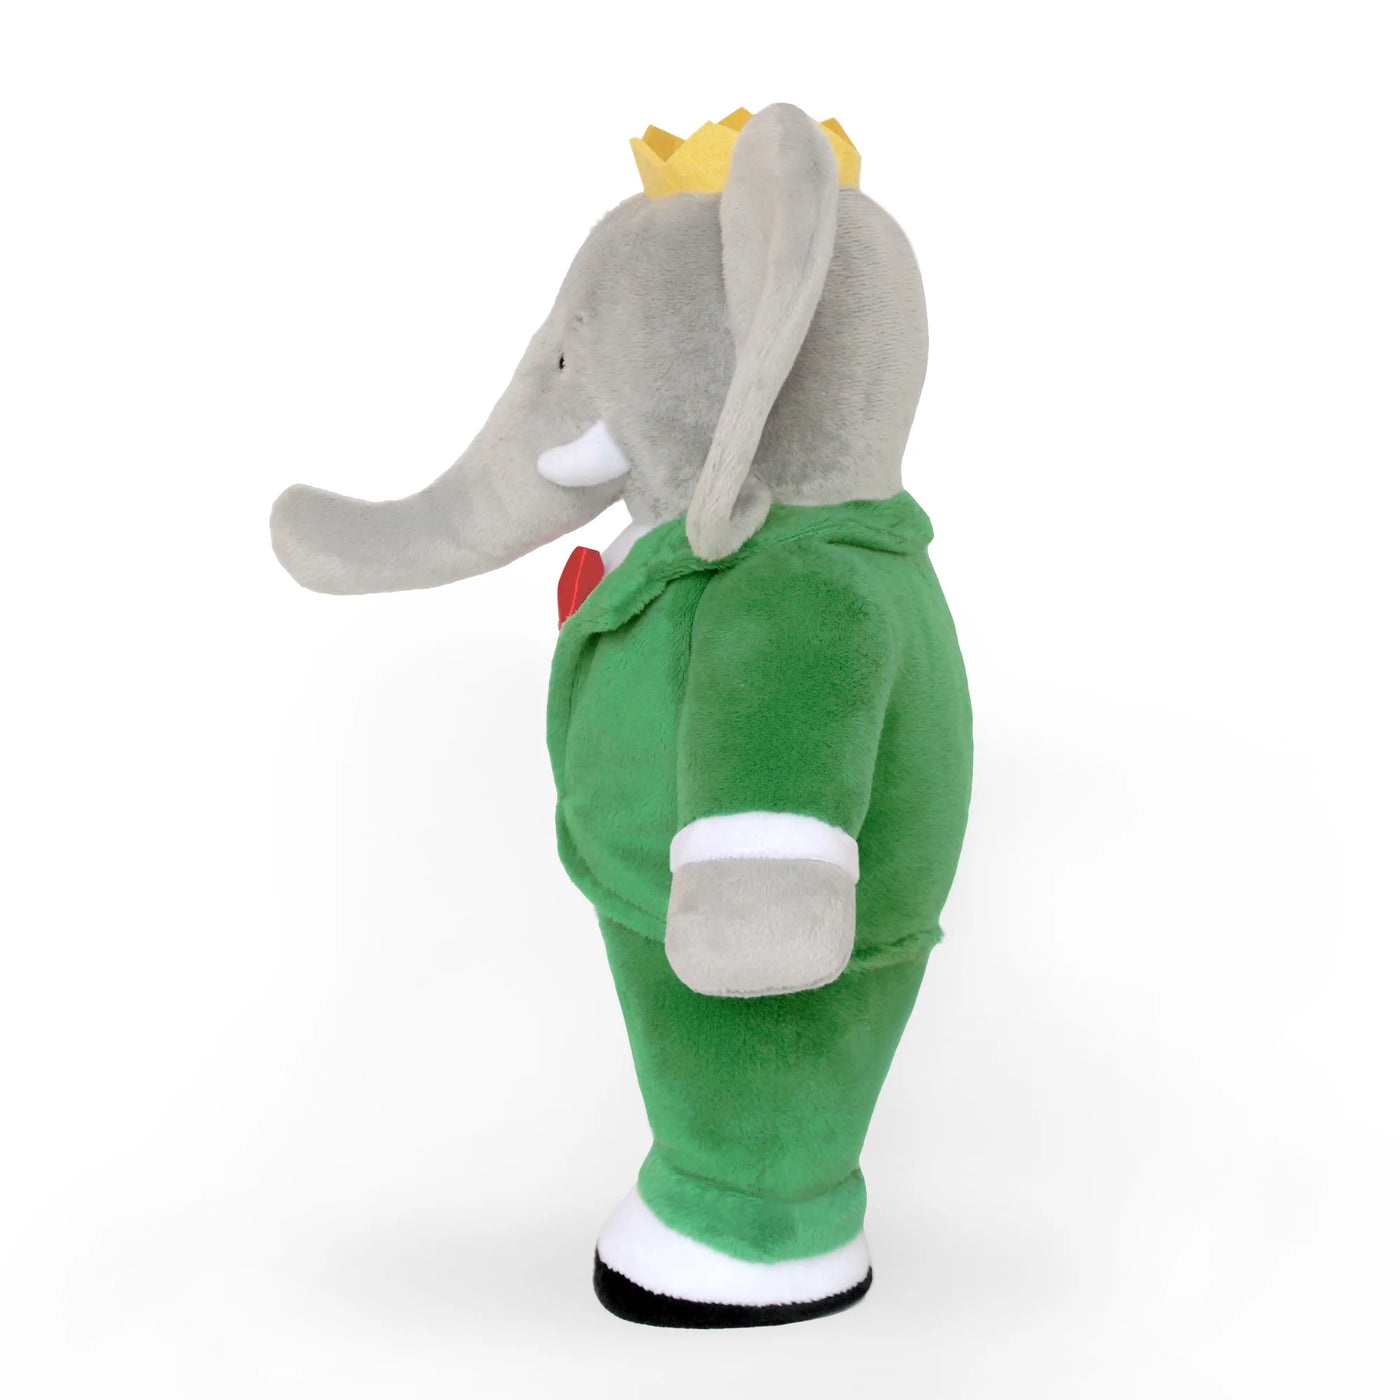 Classic Standing Babar 13" Soft Toy